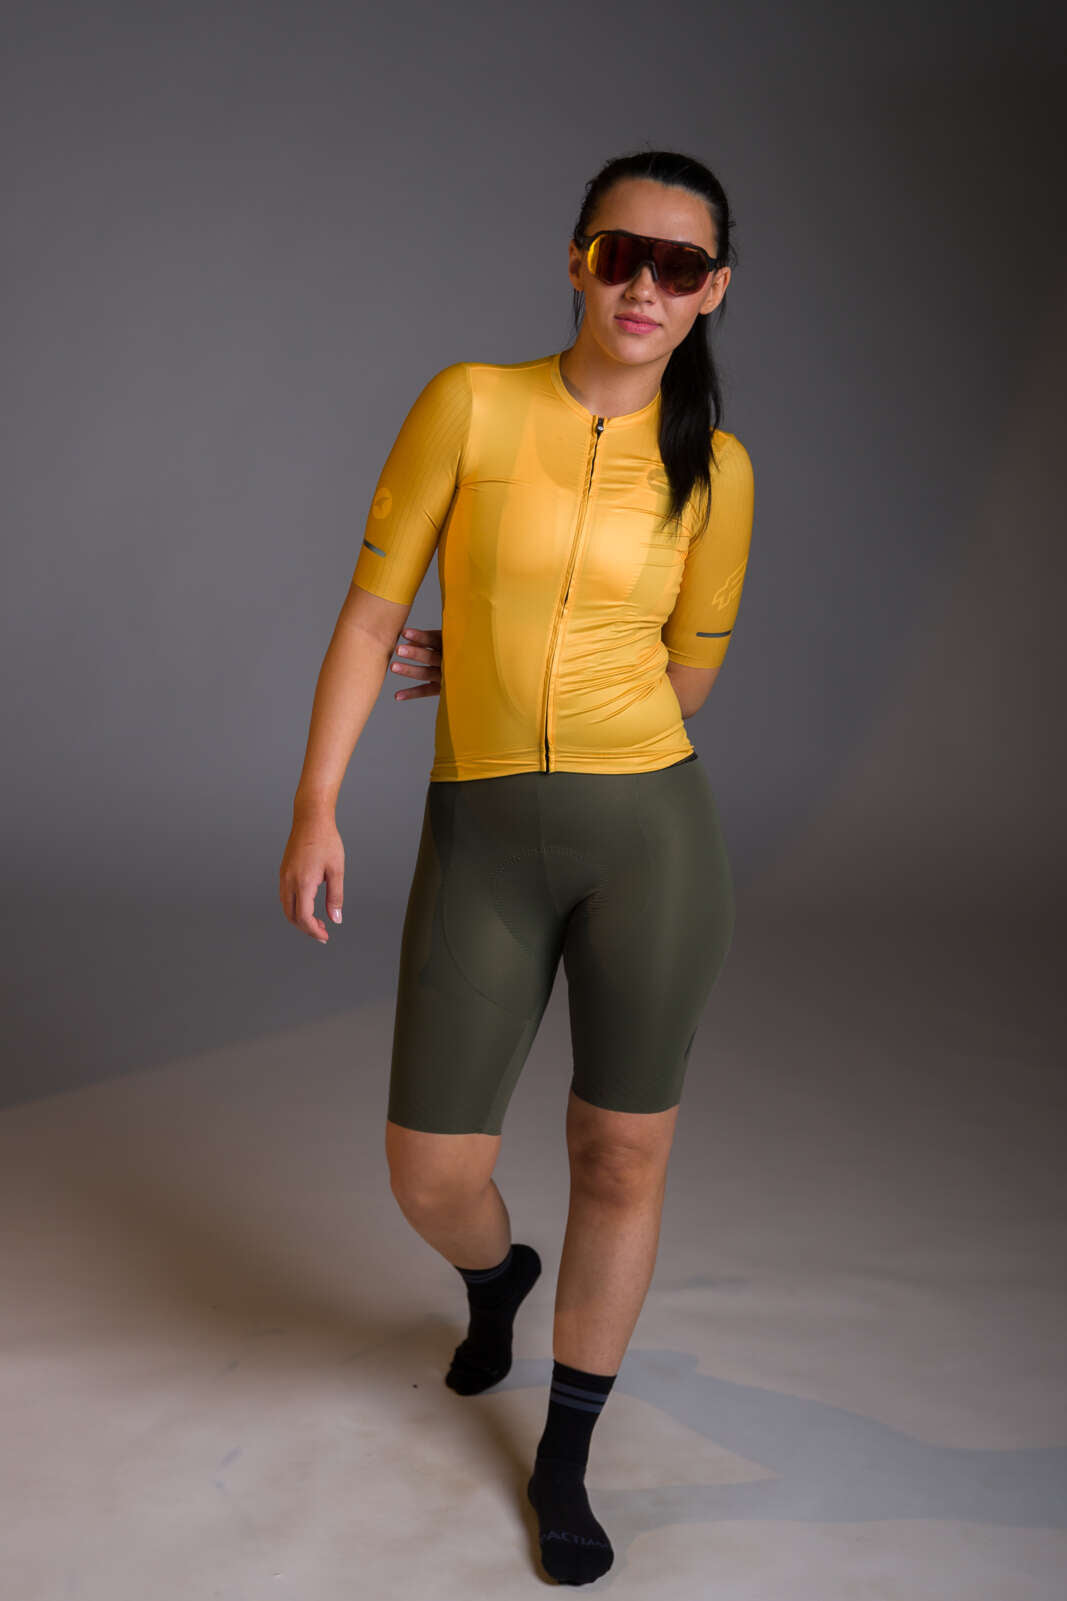 Women's Olive Green Cycling Bibs - Flyte Paired with a Yellow/Orange Jersey